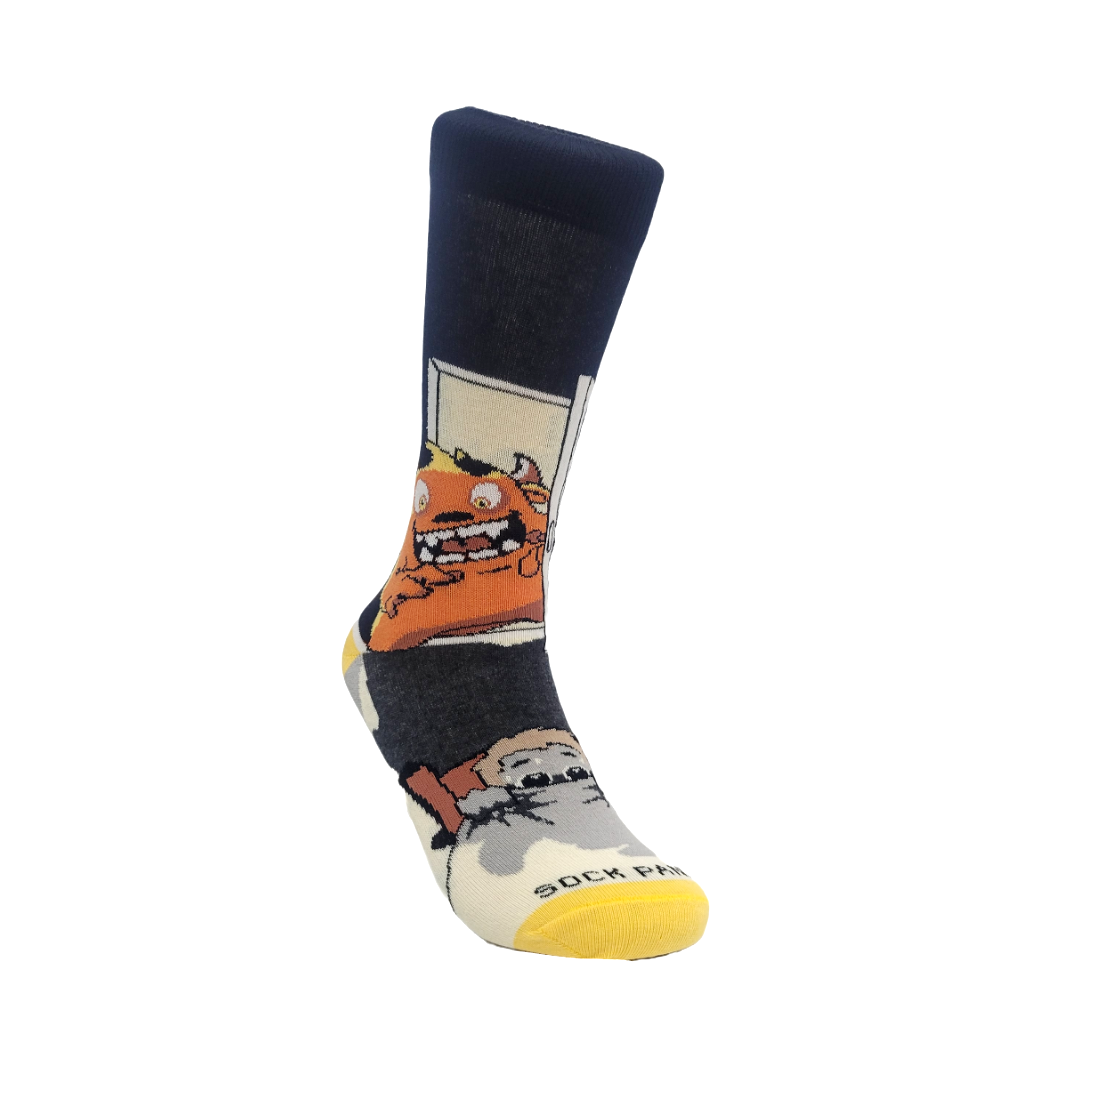 Nightmare Monster in the Closet Socks from the Sock Panda (Adult Small)